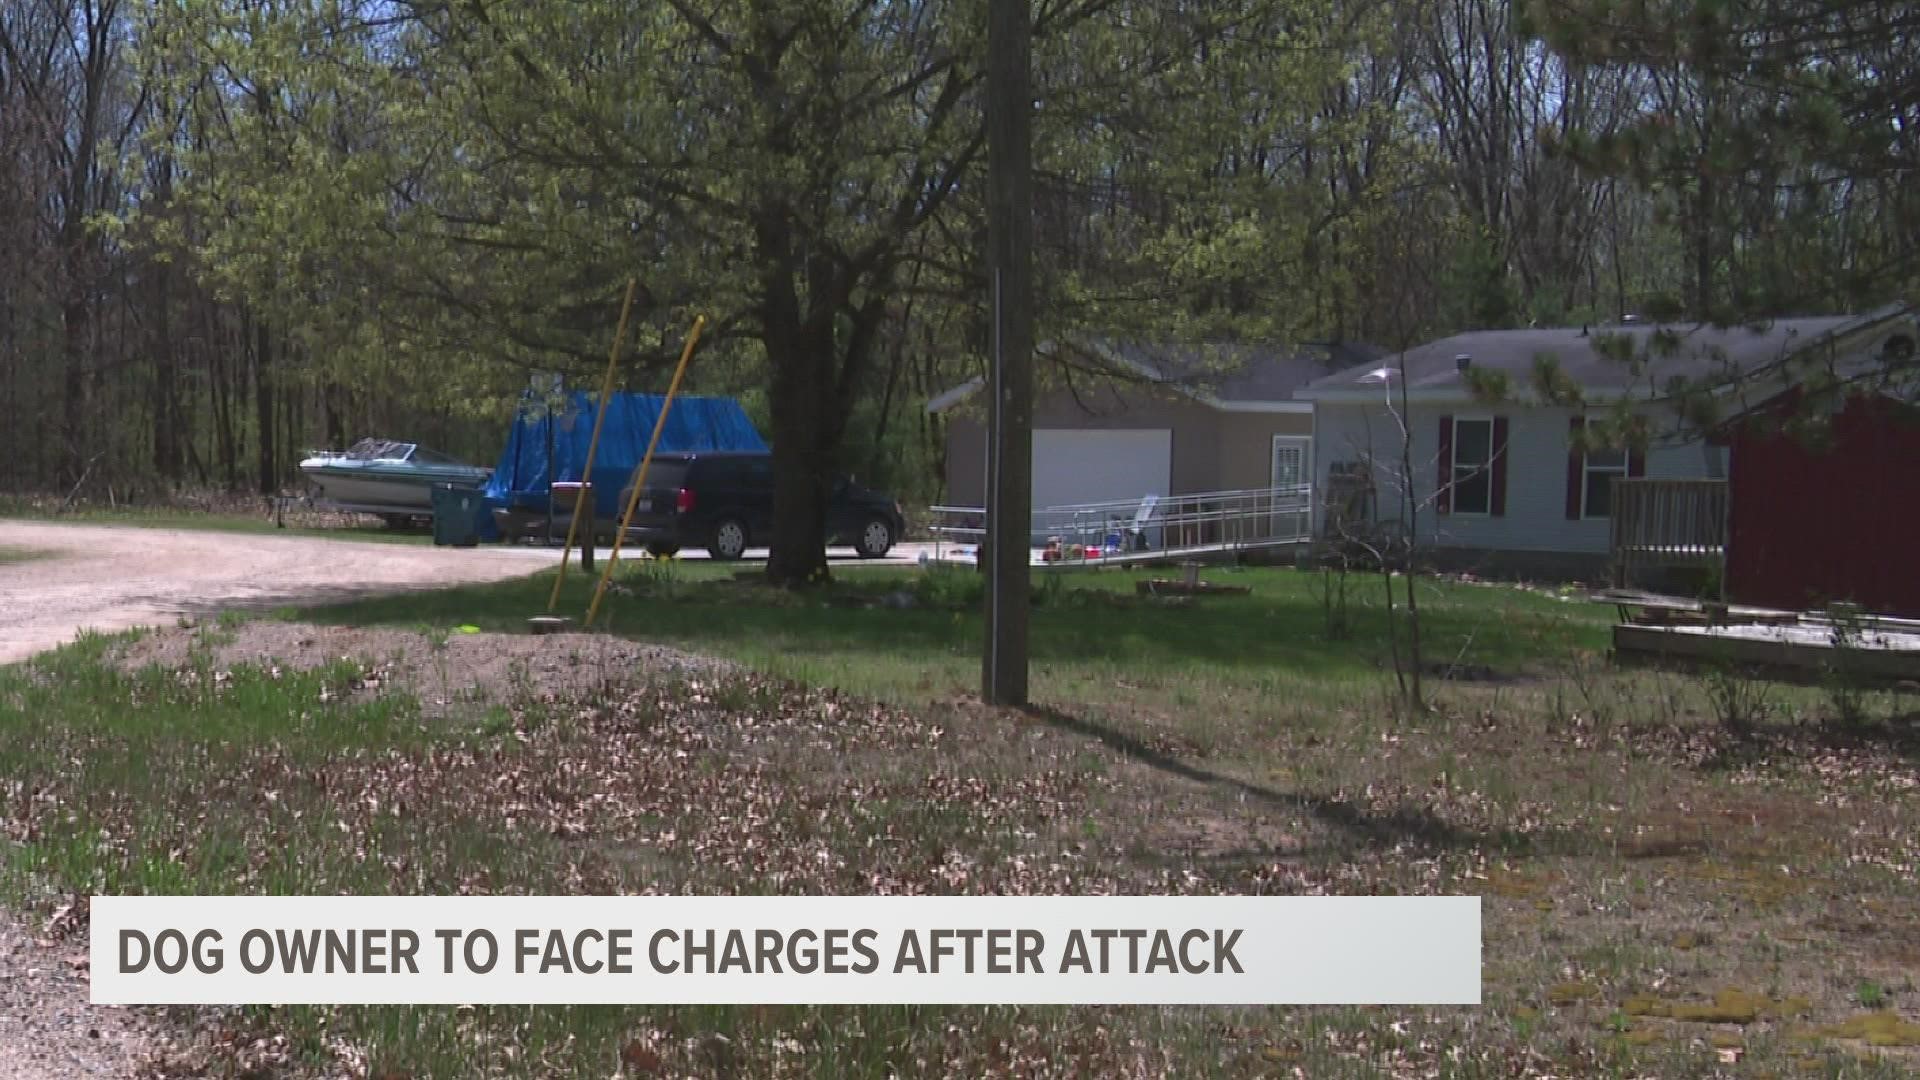 The mother of the 5-year-old says he suffered many bad gashes to his neck, face and head after two dogs attacked him Thursday. The two dogs have been euthanized.